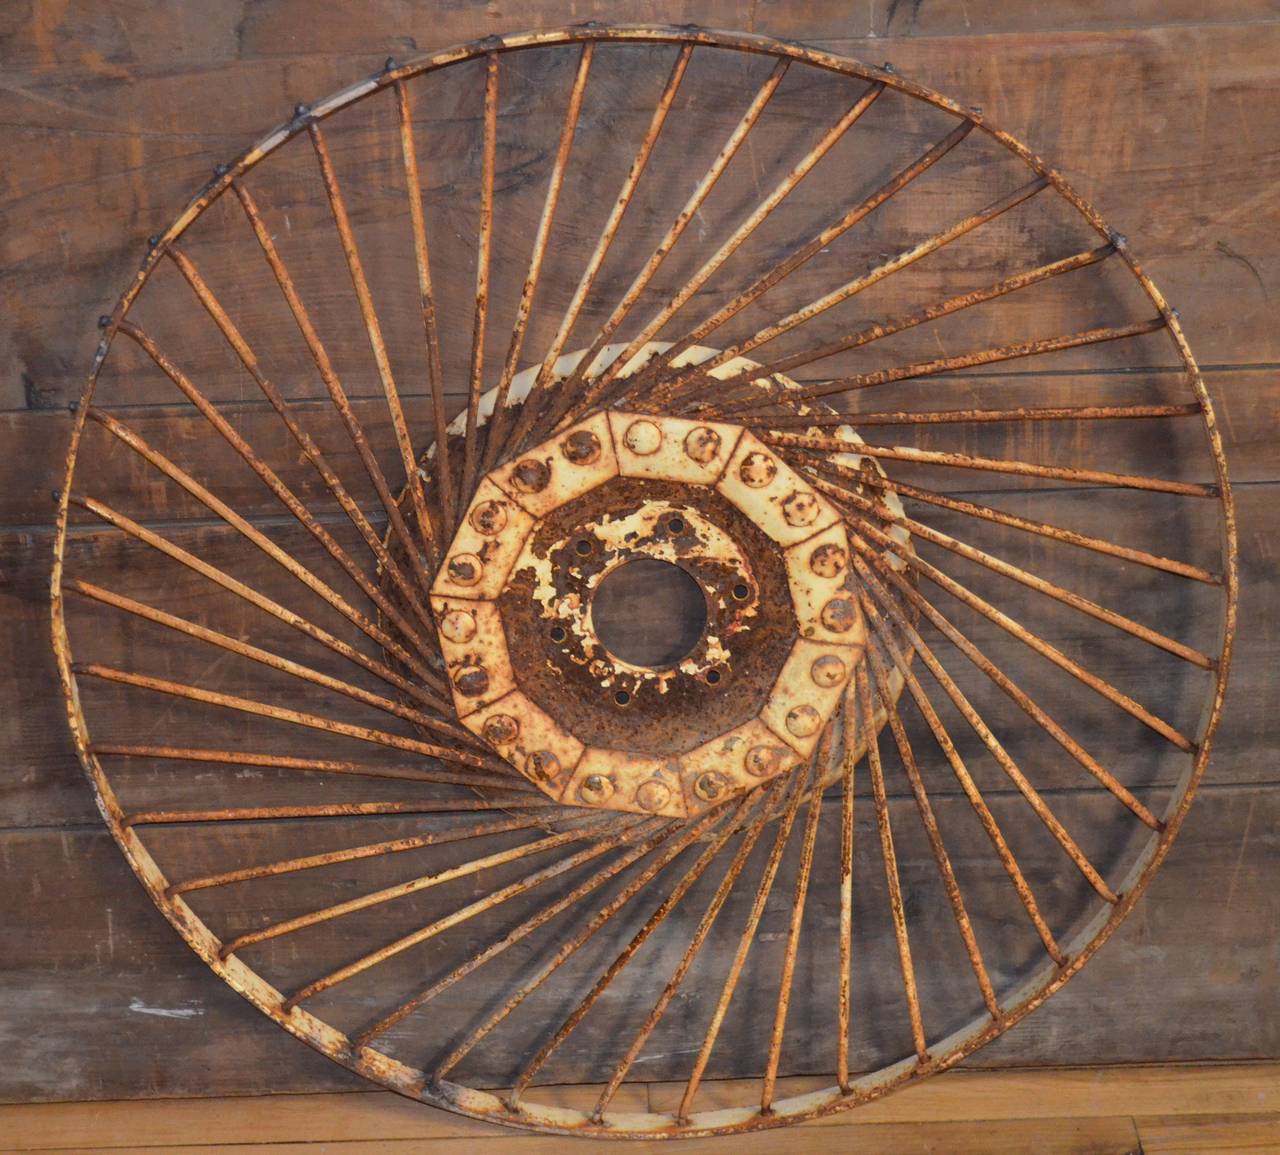 Wheel from Farm Implement 2